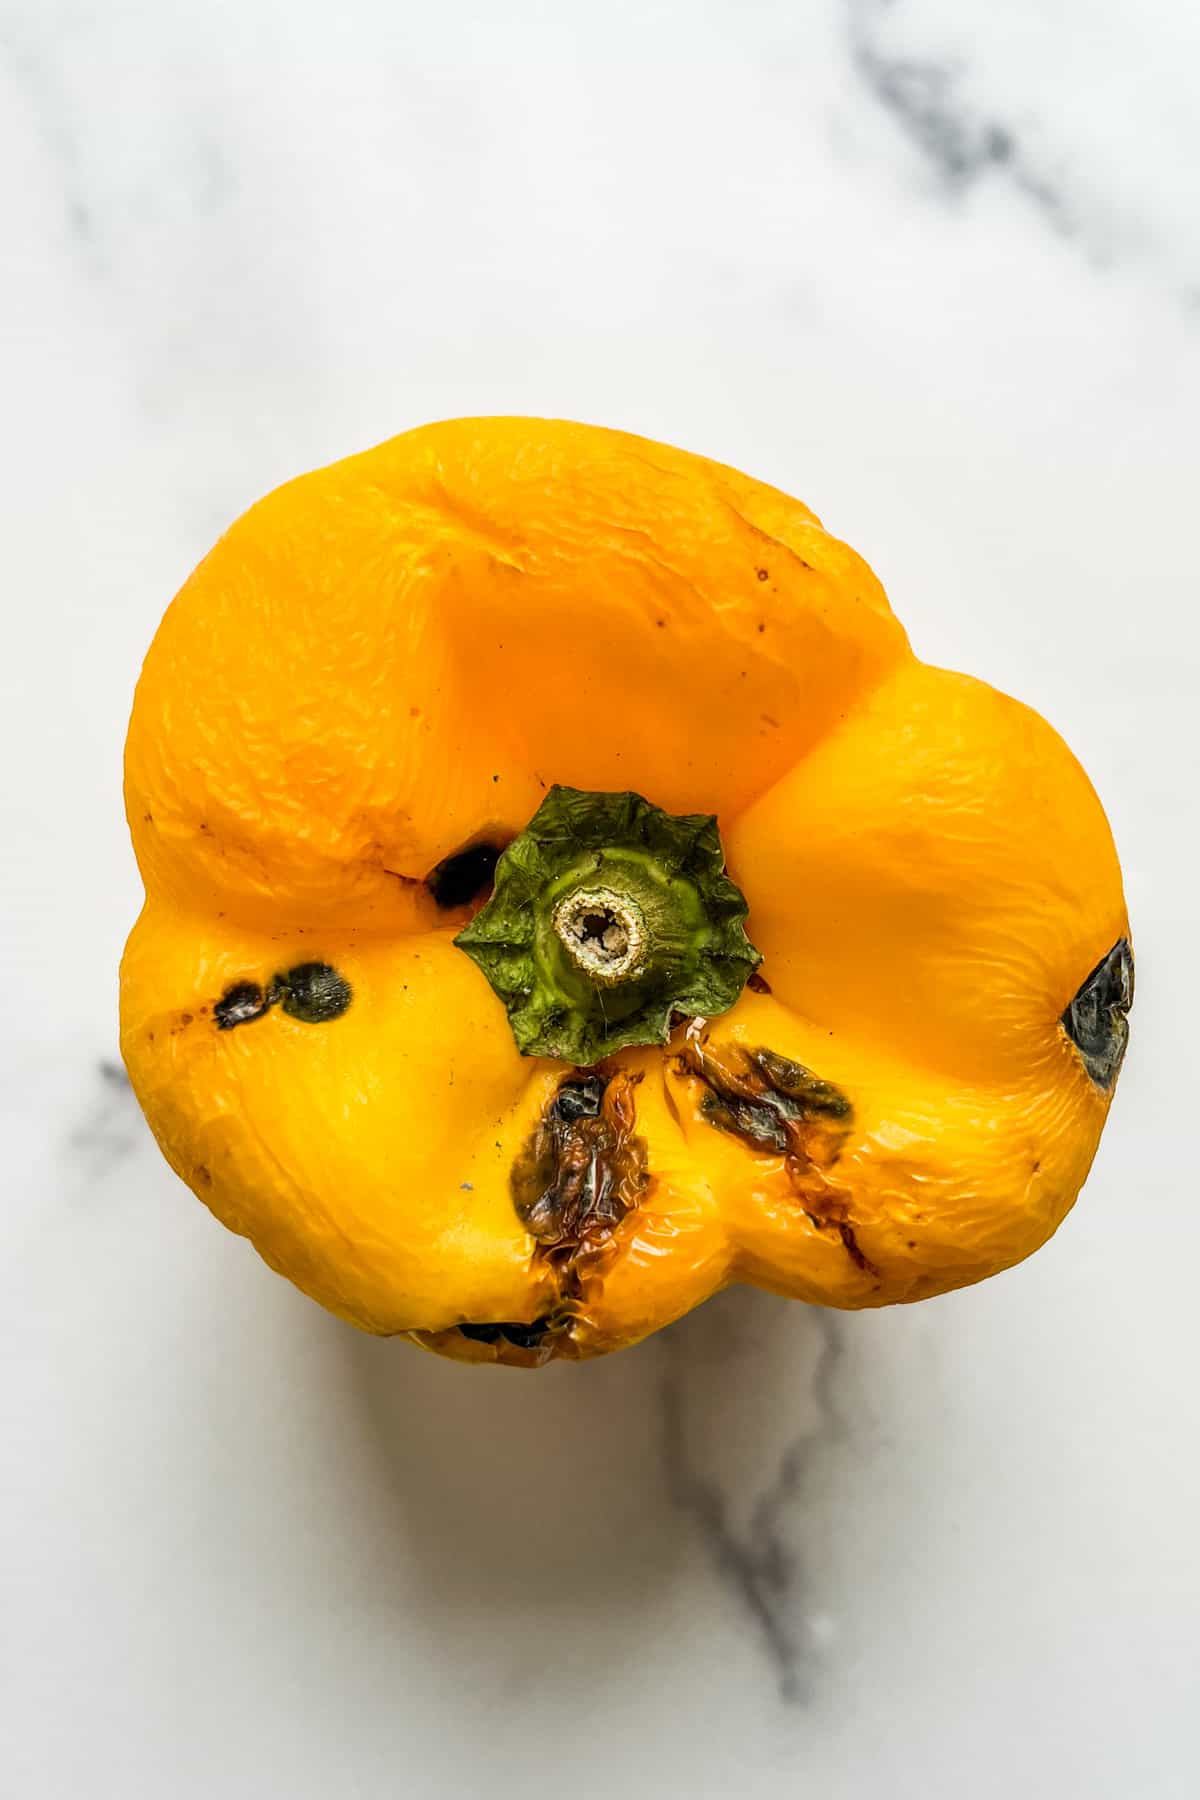 A yellow bell pepper with dark spots.